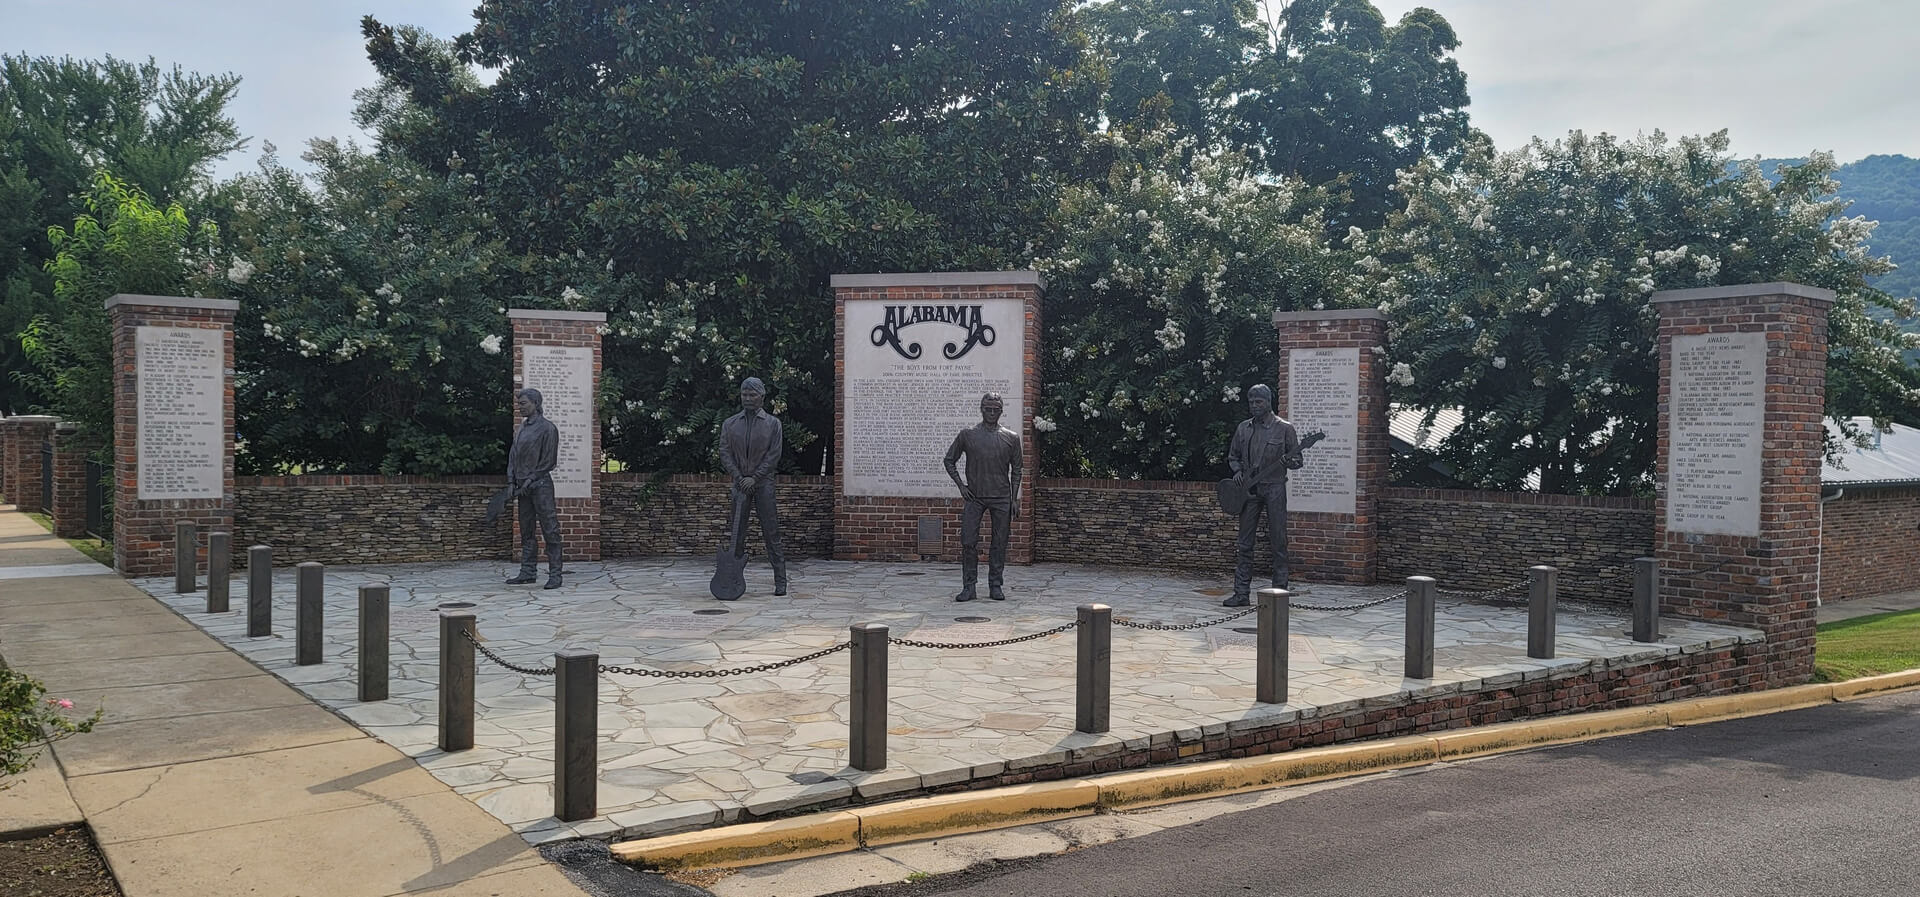 Statues of a musical band with information and details